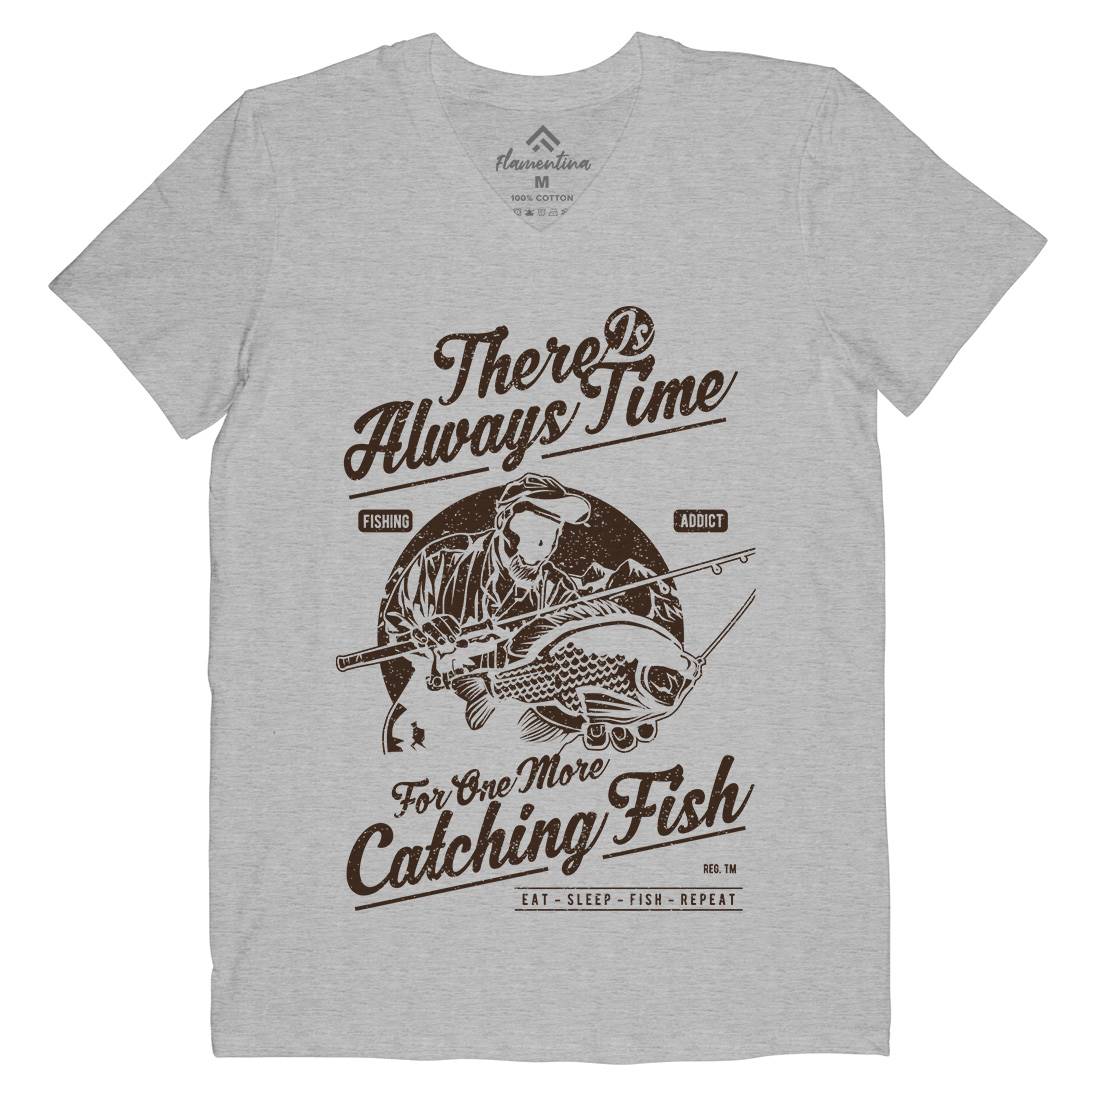 One More Catching Mens V-Neck T-Shirt Fishing A731